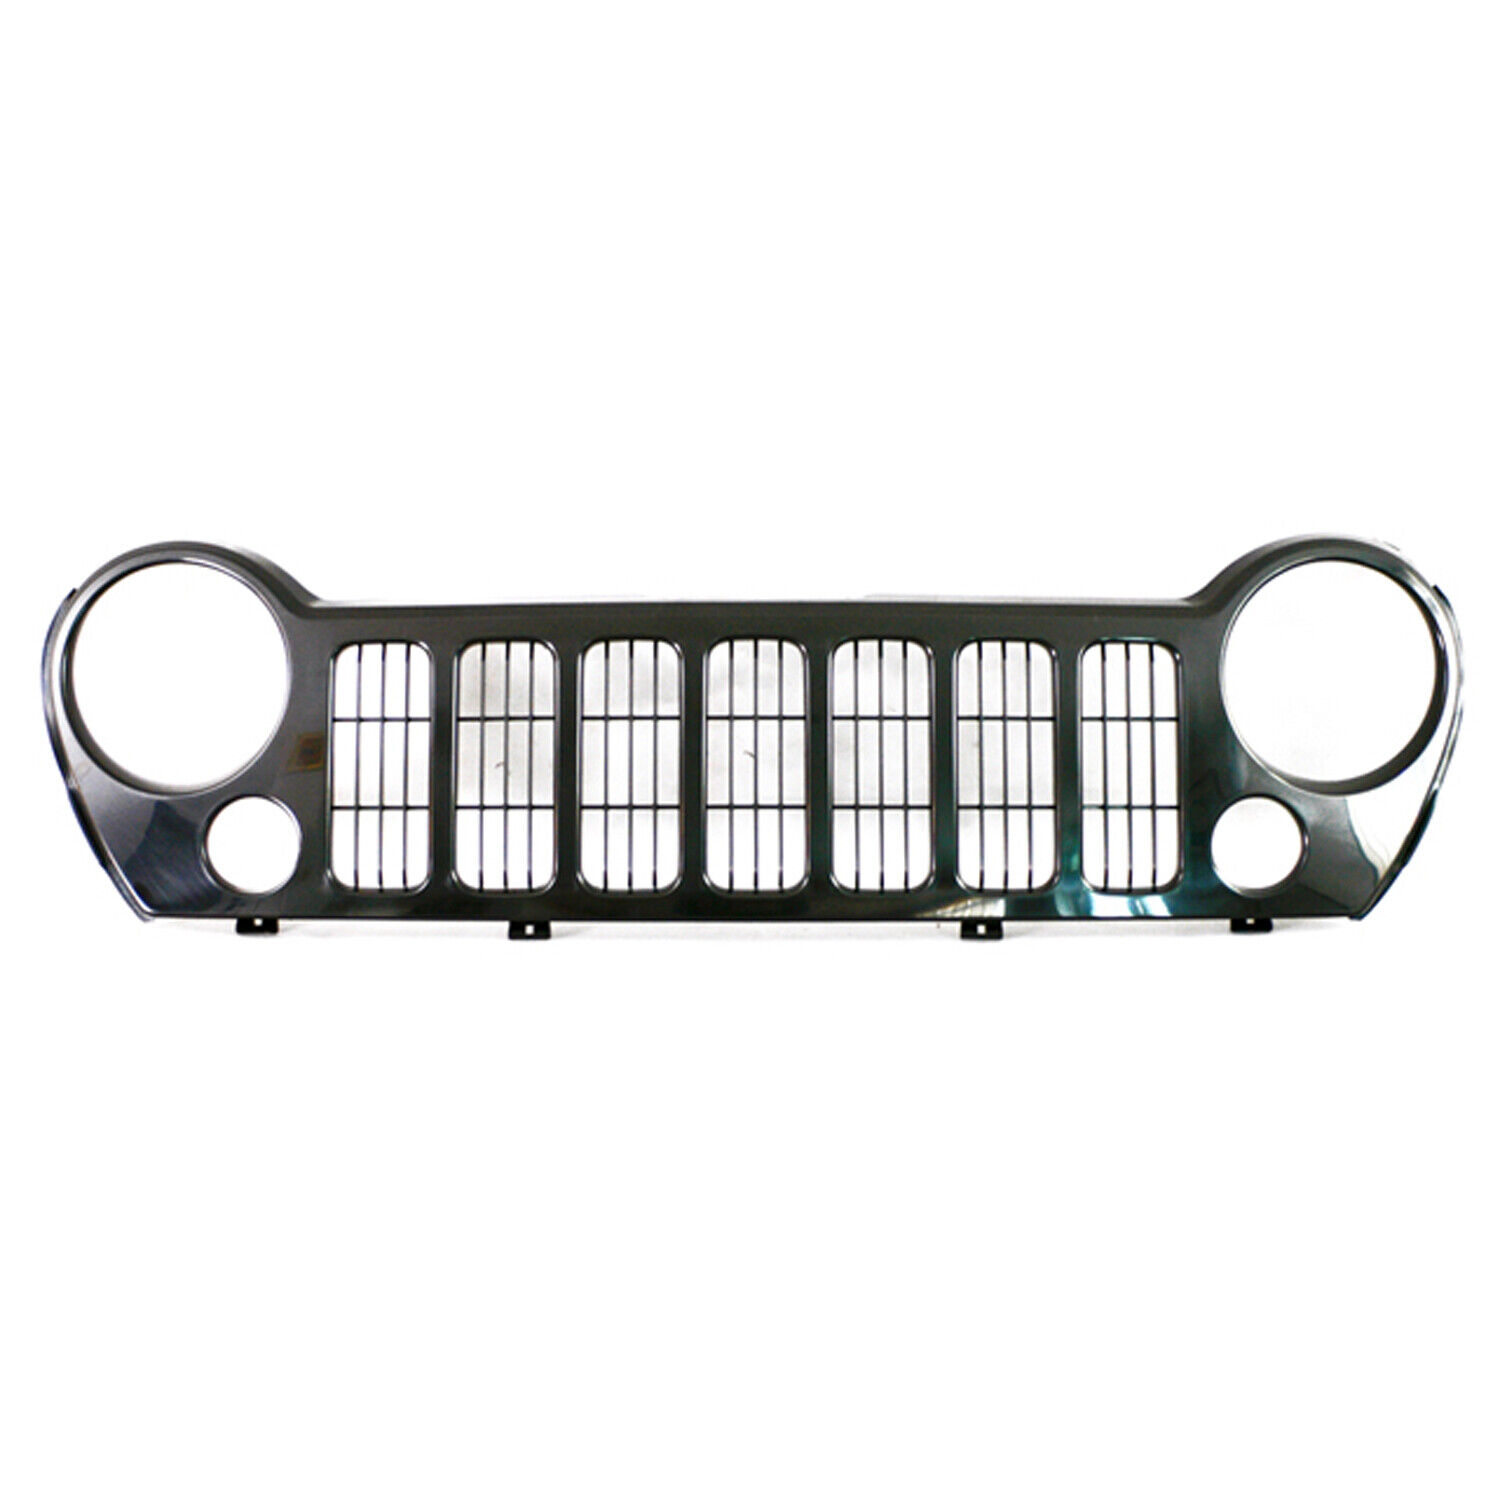 Grille assy for 2005-2007 JEEP LIBERTY fits CH1200291 / 5JJ86ZZZAF